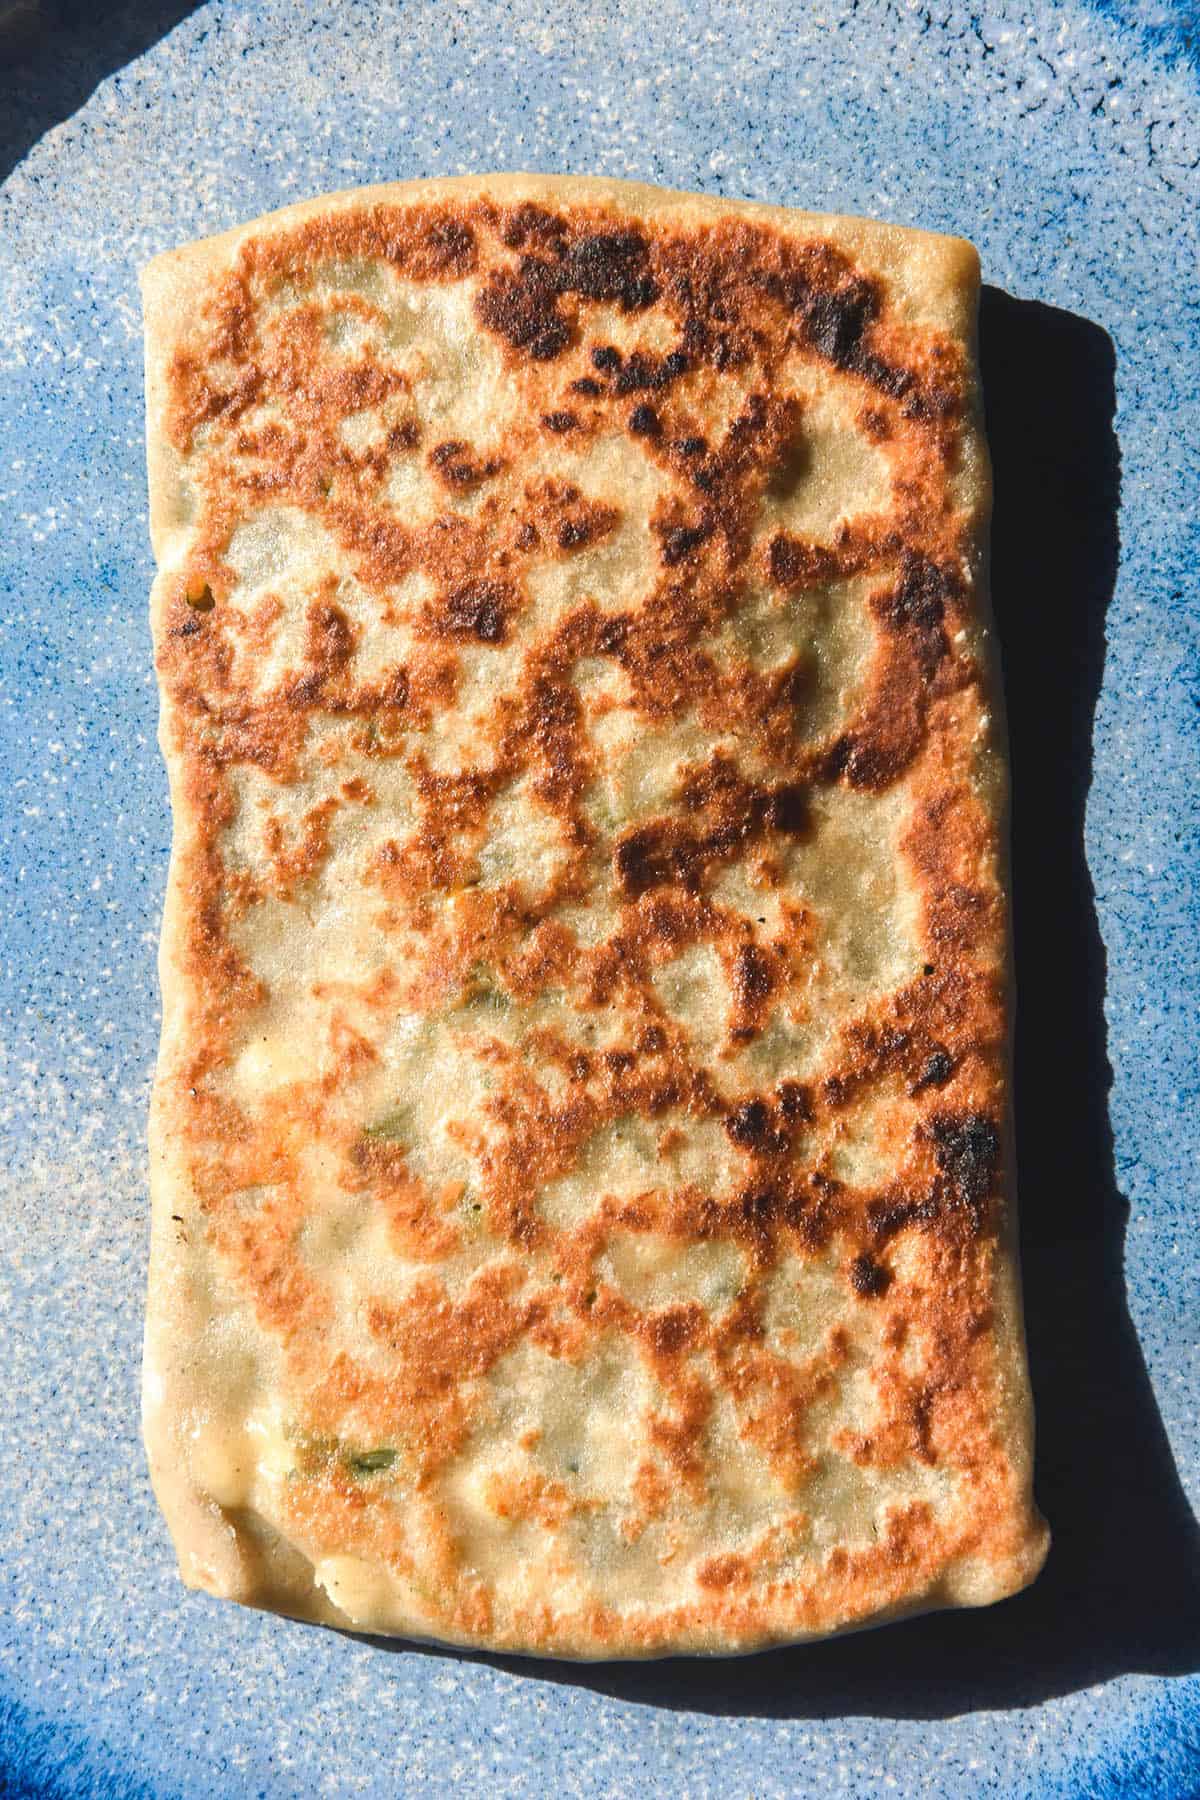 An aerial macro image of a deeply golden gluten free gozleme atop a bright blue ceramic plate